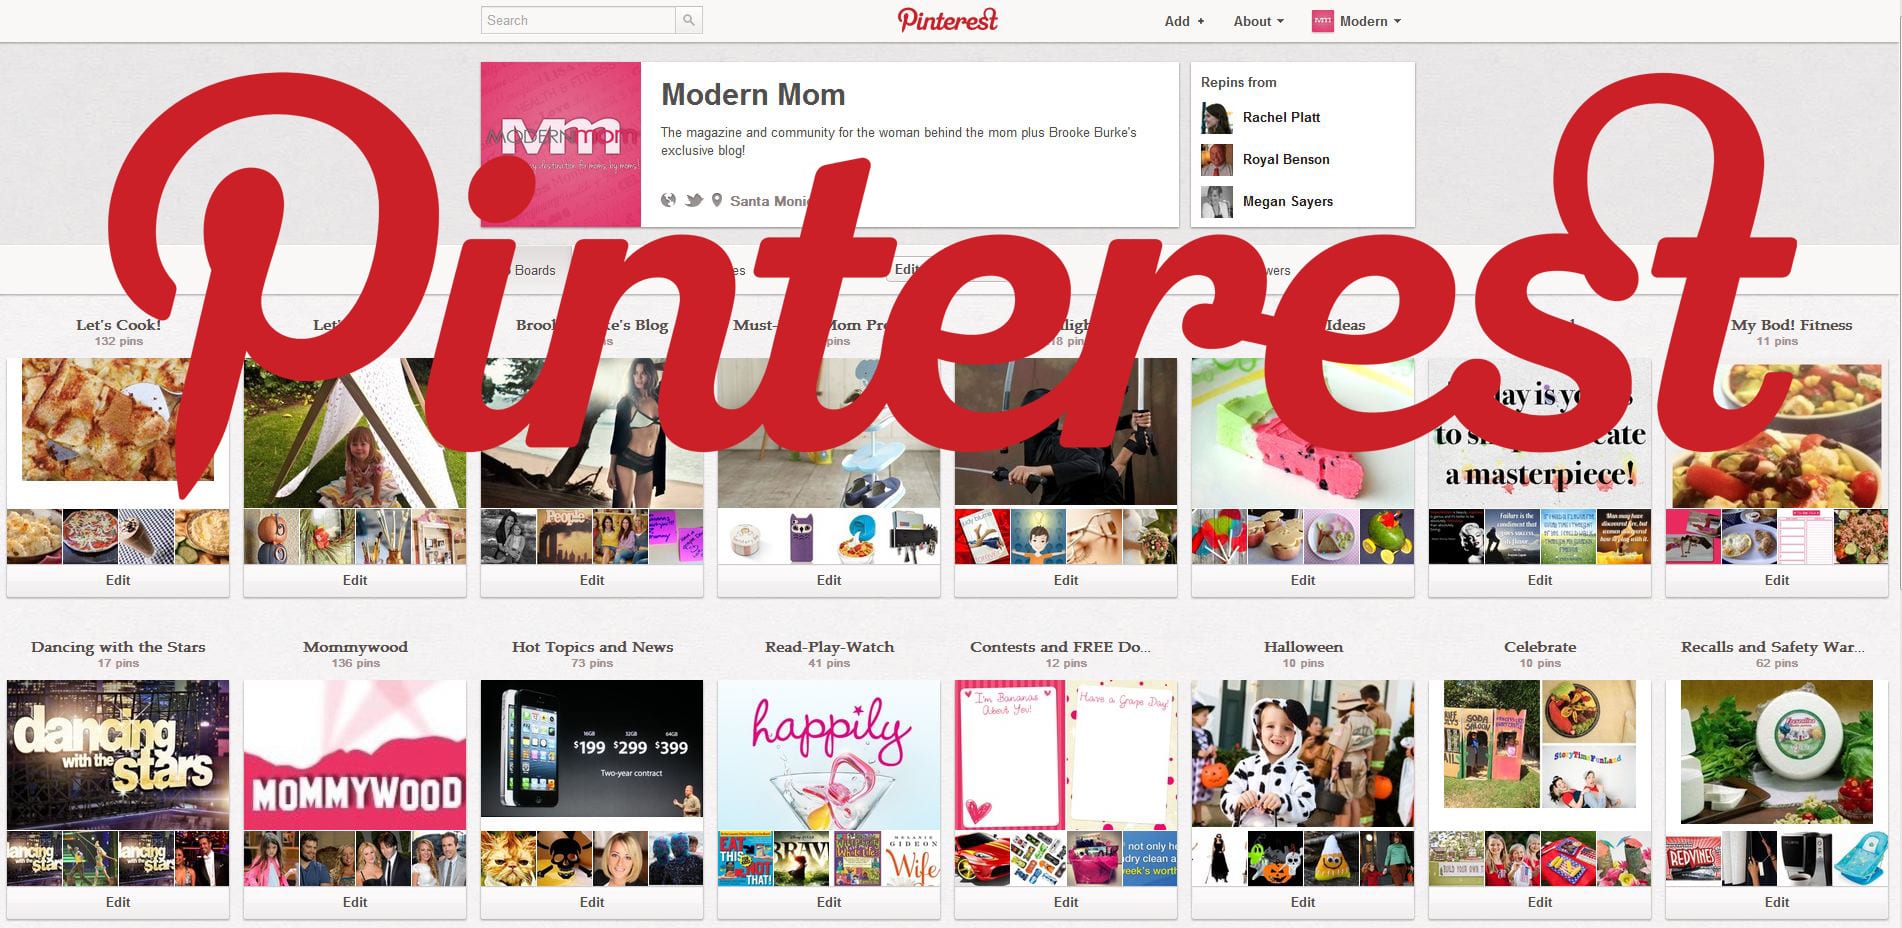 All About Pinterest: Cheat Sheet for Moms